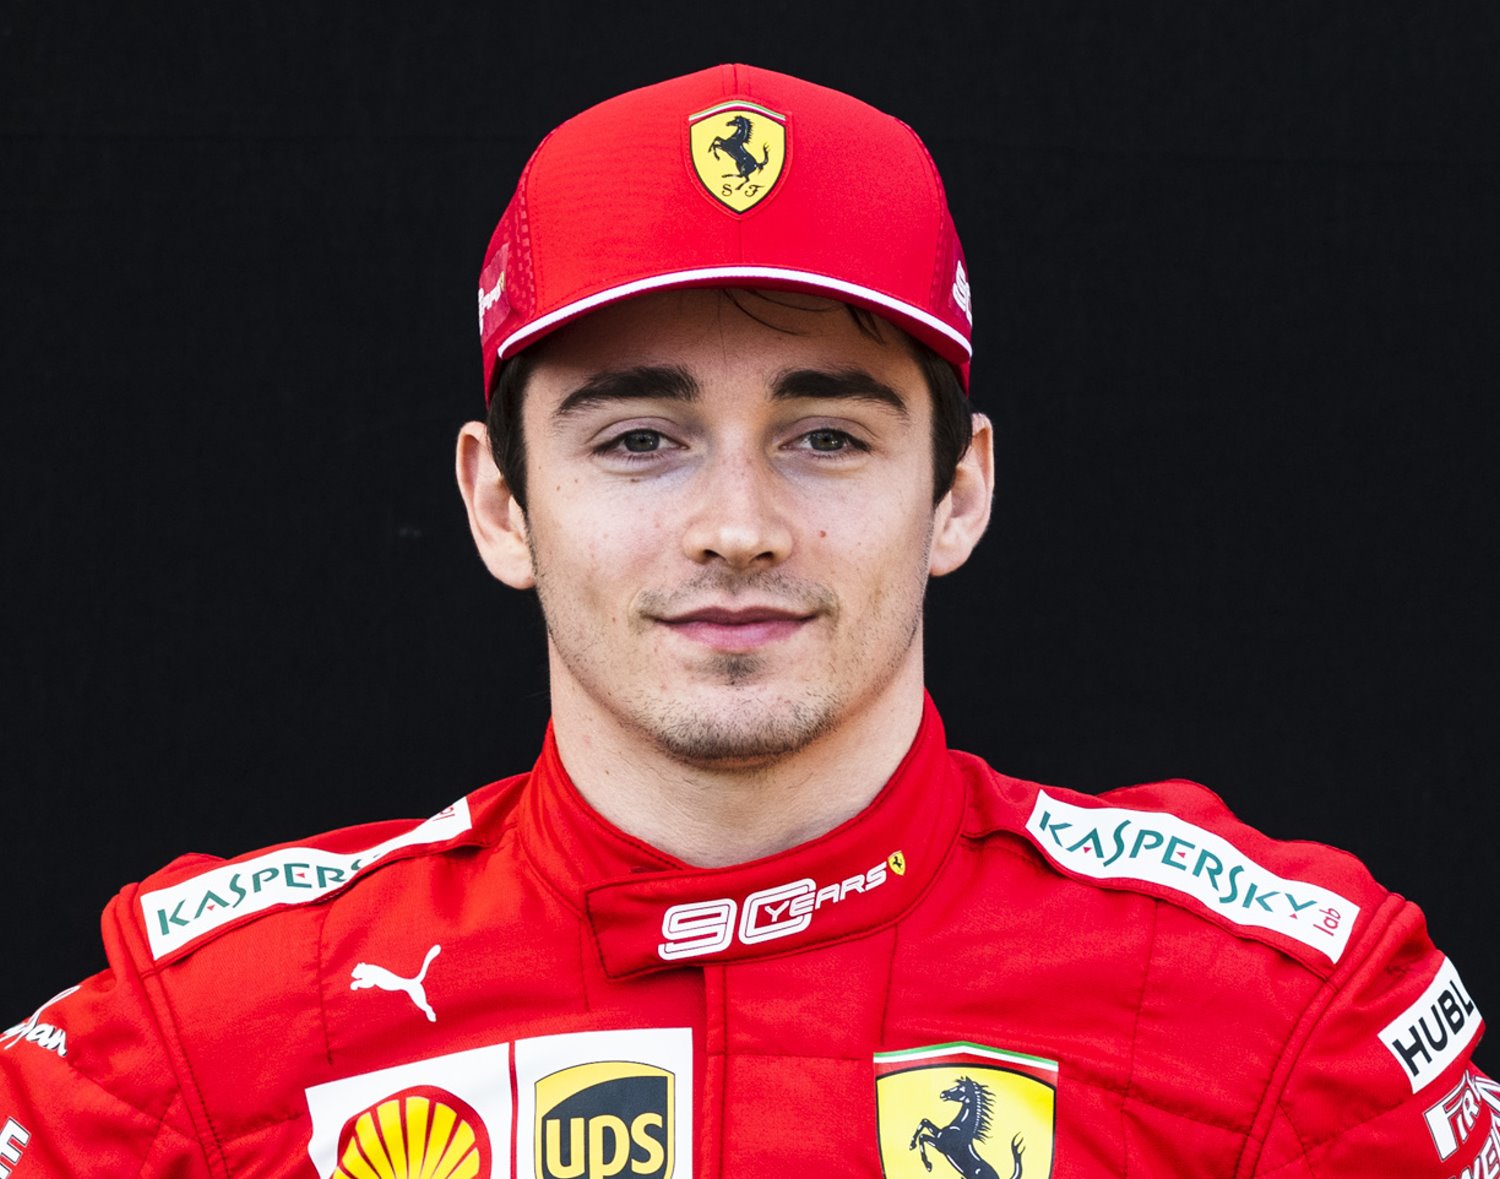 Can Leclerc hold onto 3rd place?